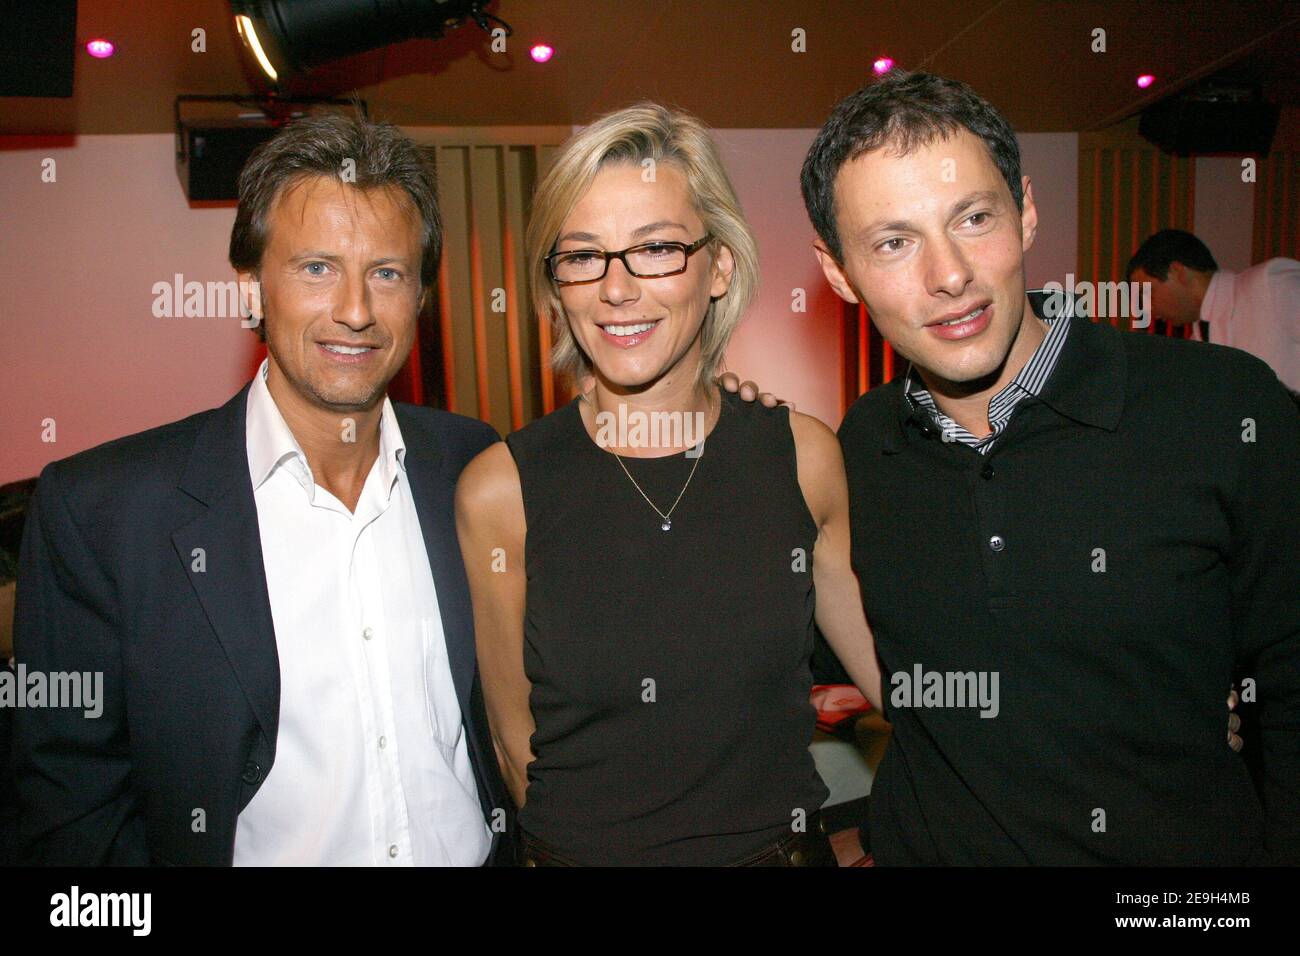 Vincent Perrot, Laurence Ferrari and Marc-Olivier Fogiel pose during the  annual press conference of French radio station RTL , rue Bayard in Paris,  France on August 29, 2006. Photo by Mehdi Taamallah/ABACAPRESS.COM